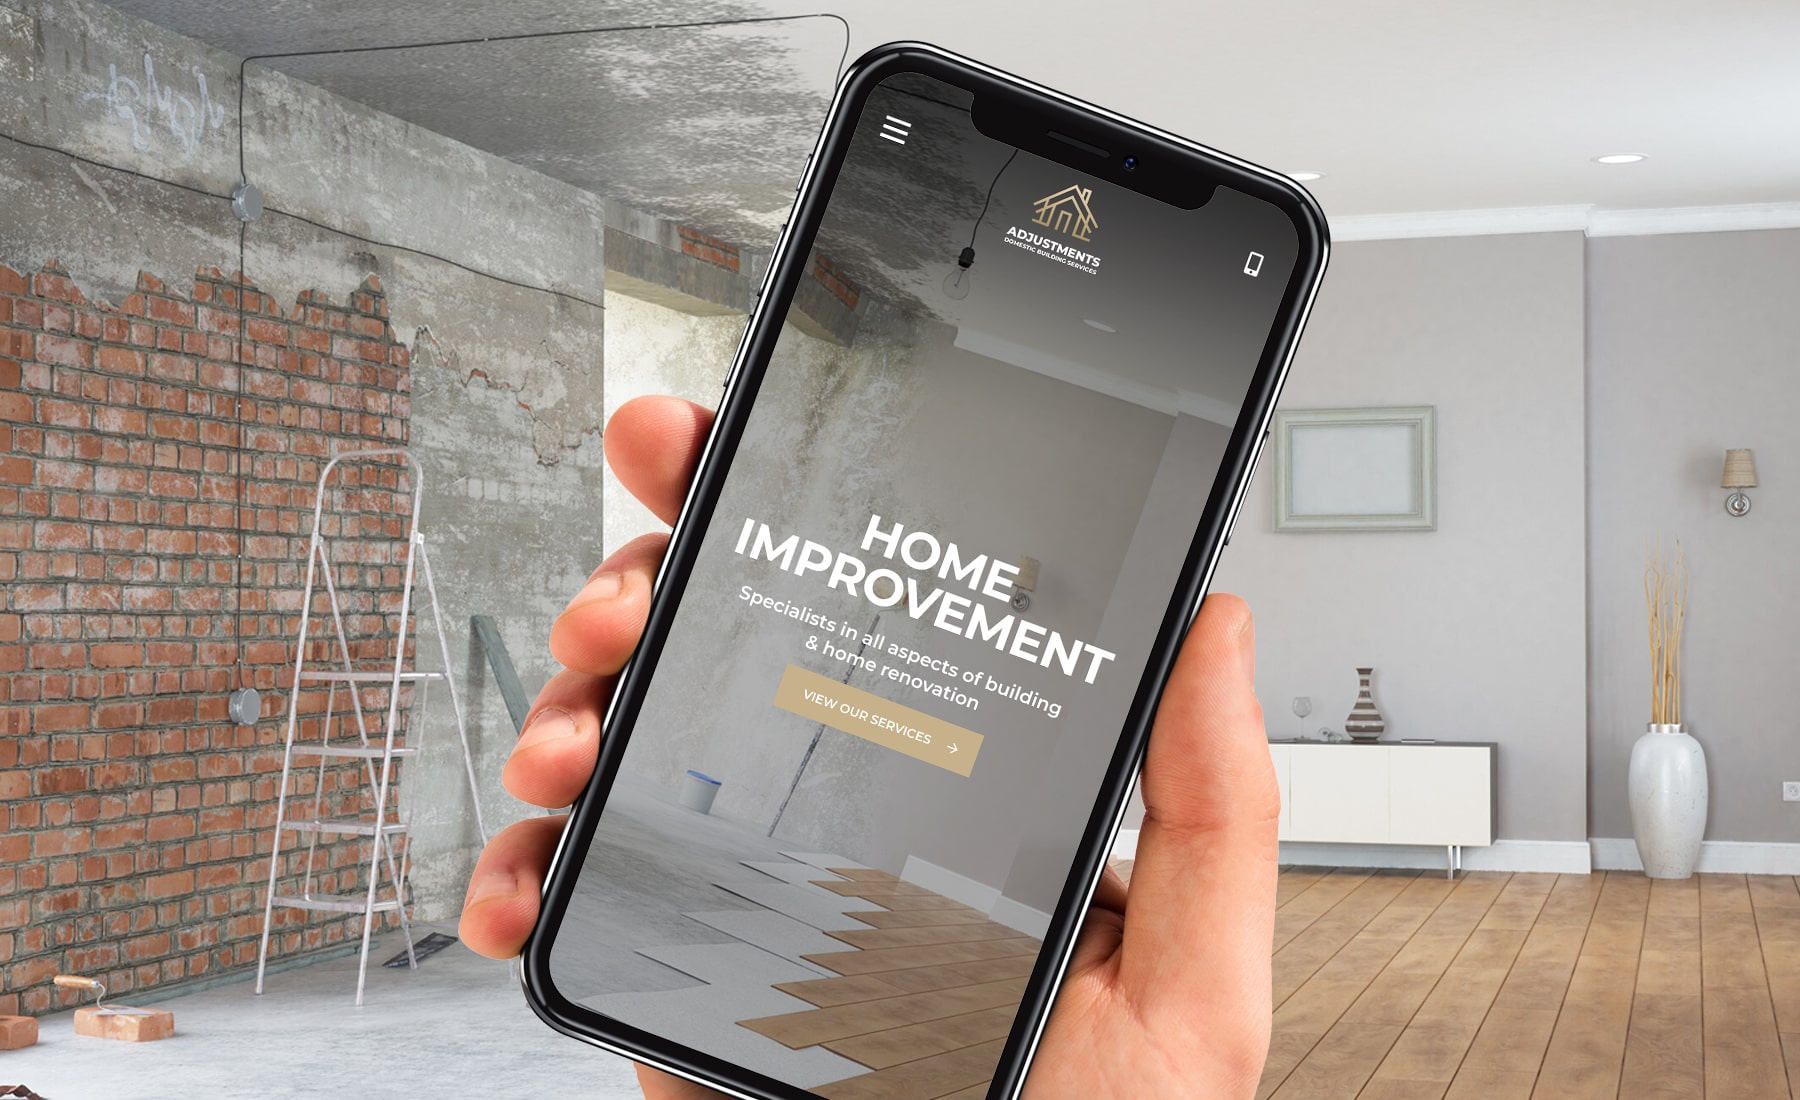 Home Improvements One Page Website